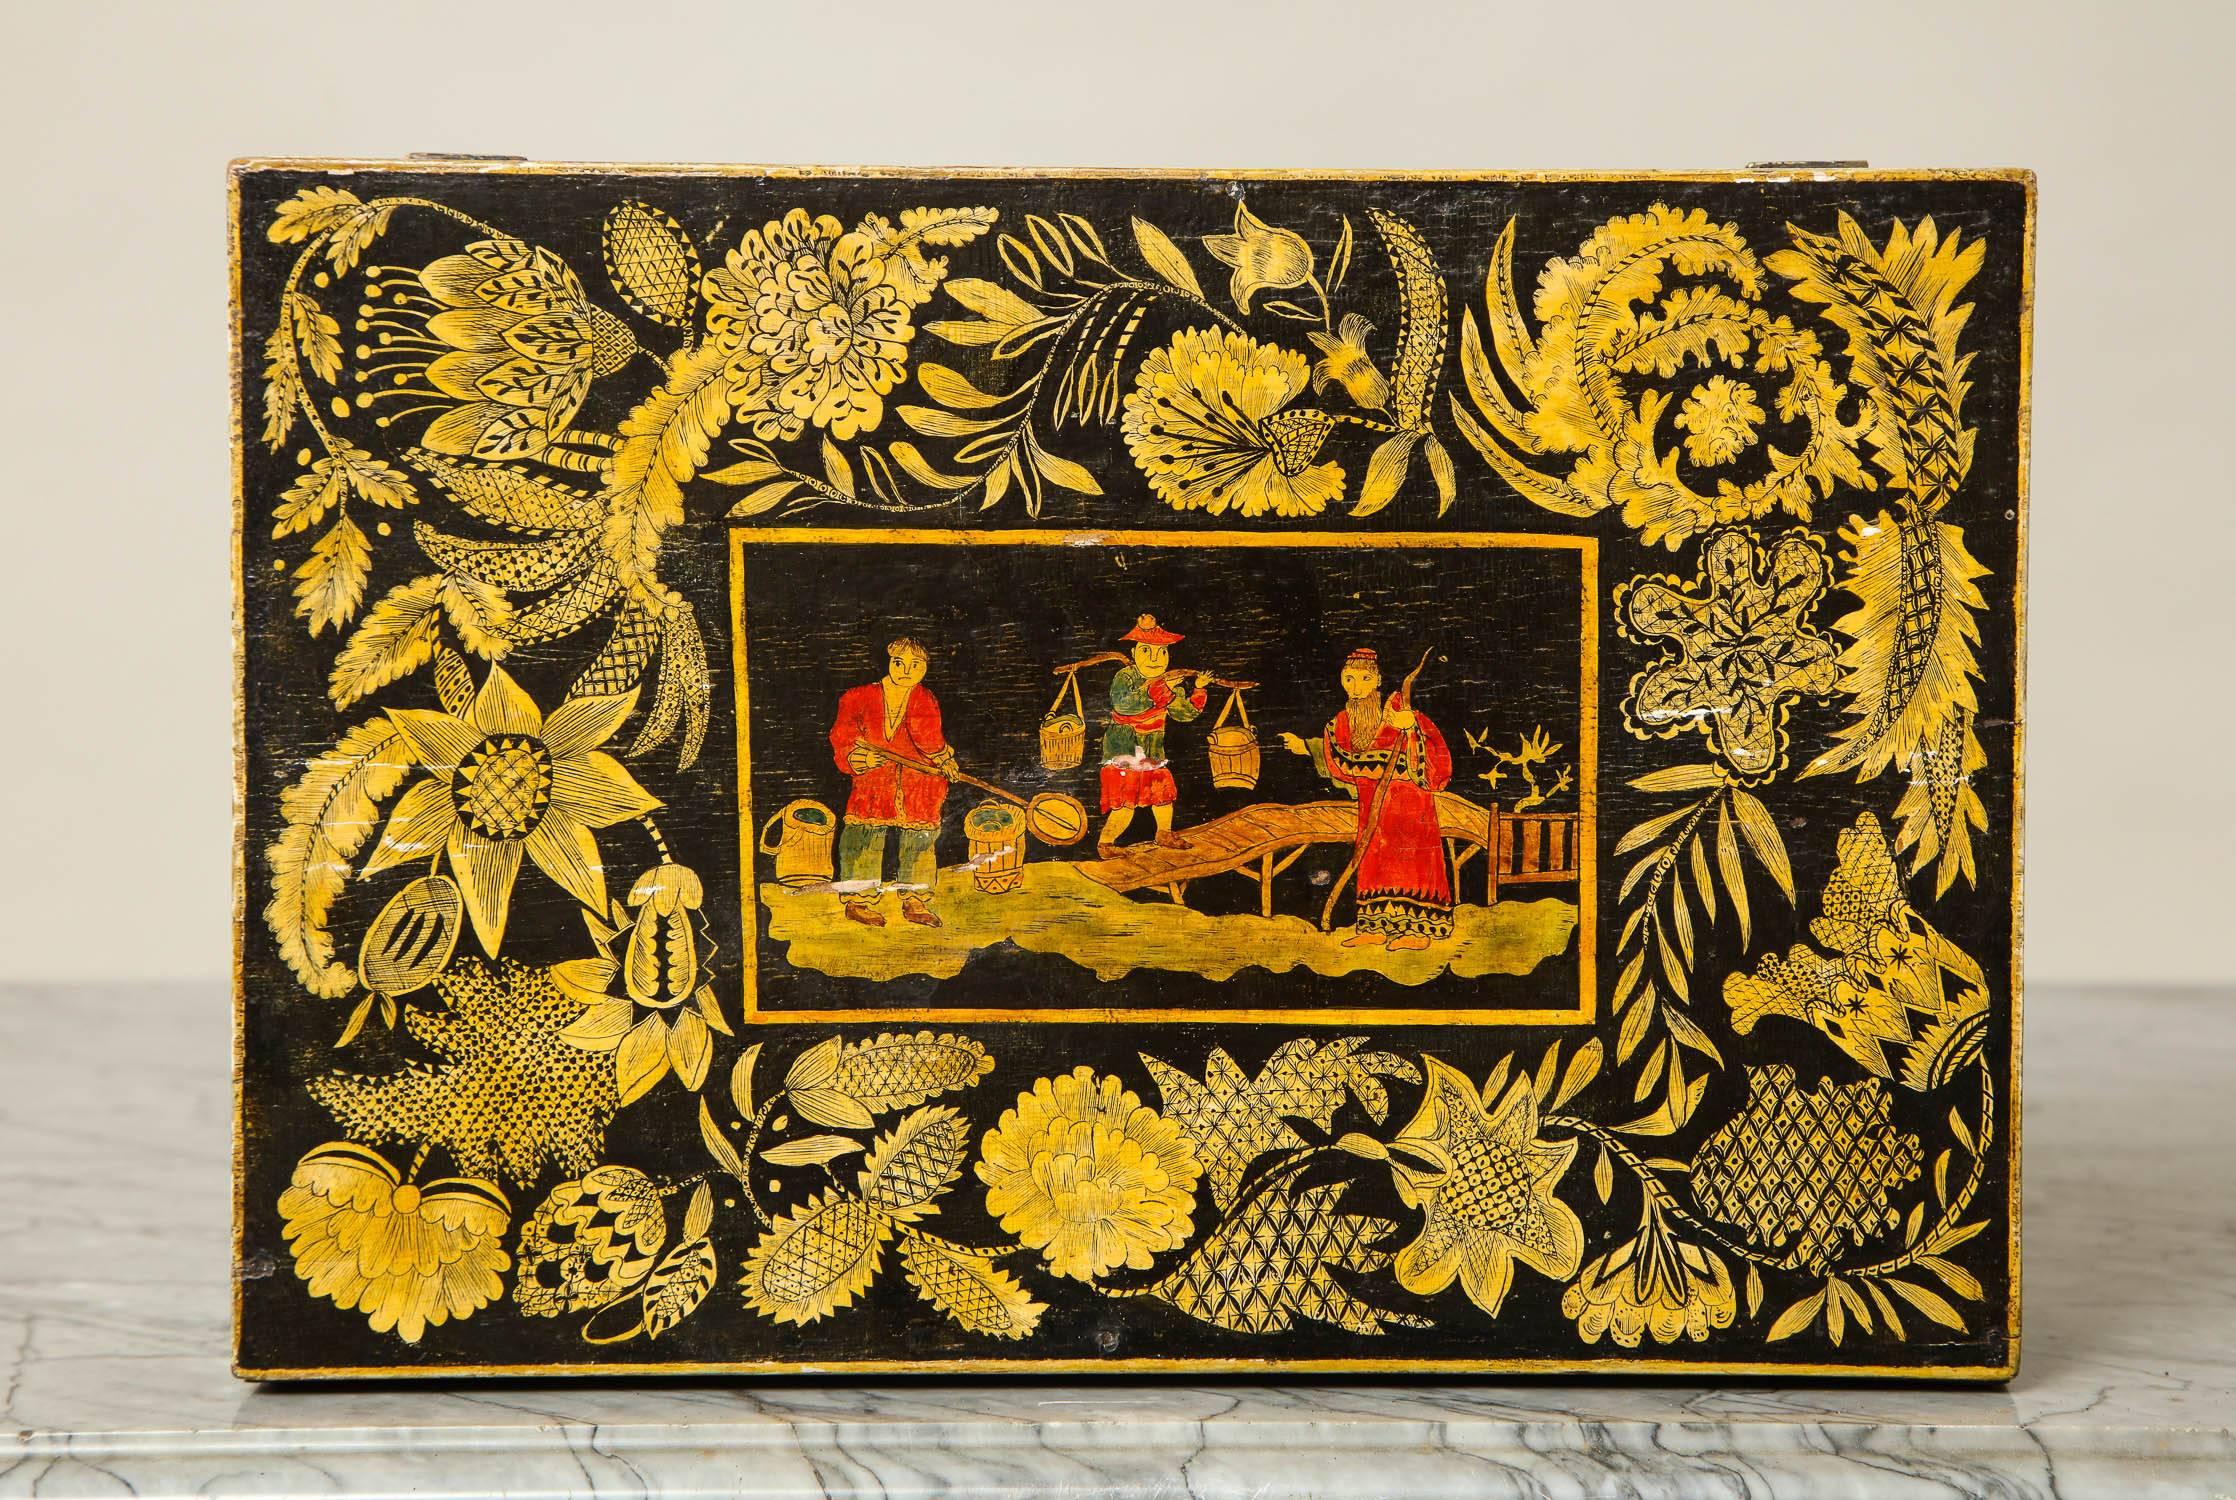 Fine early 19th century English Regency period penwork box, the center panel and front with polychrome chinoiserie decoration, the borders profusely decorated with flowers and vines, the interior with similar design to lid.  The whole with original